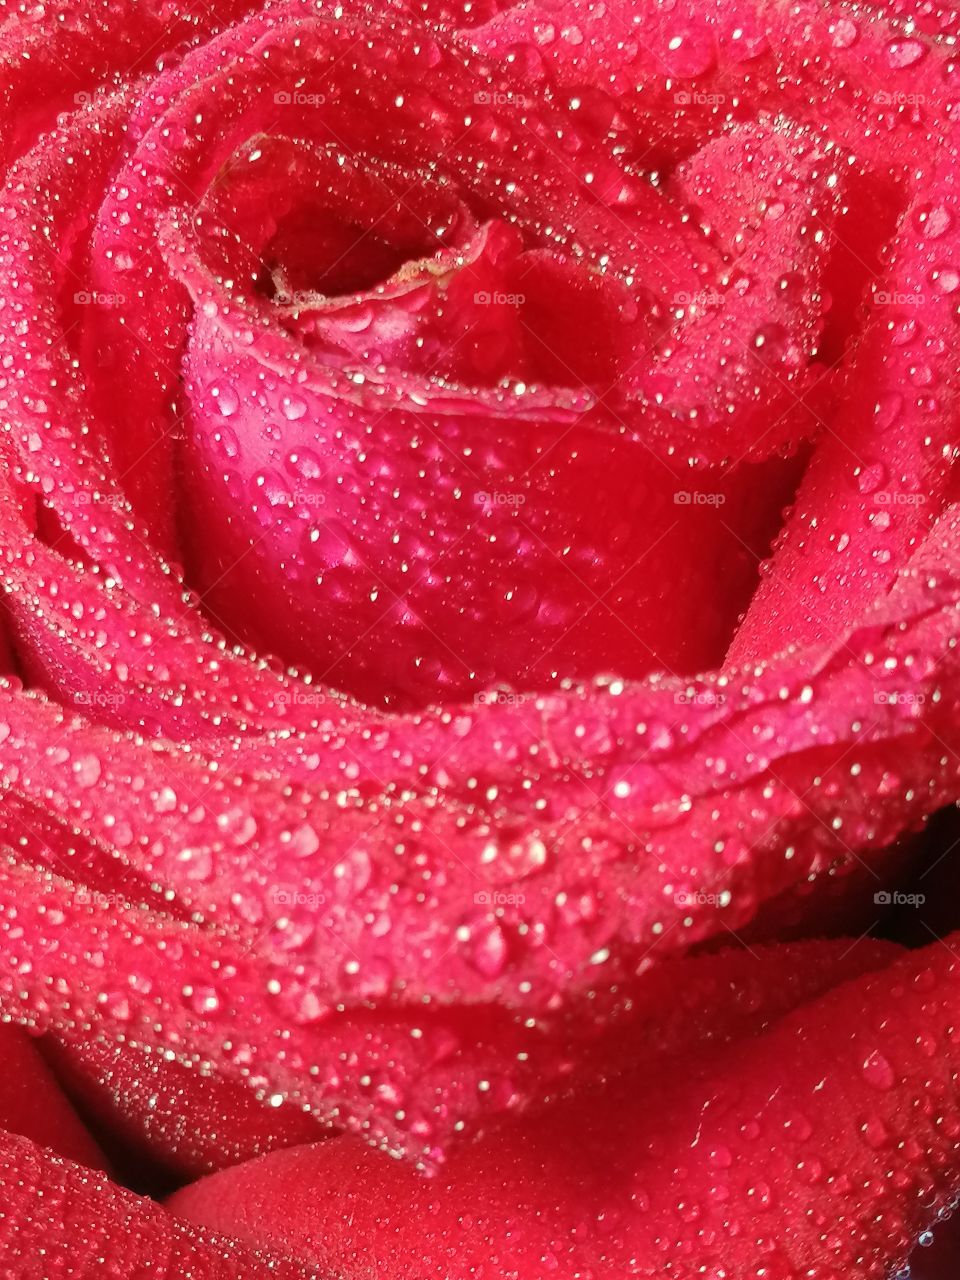 Red​ rose closeup by​ smartphone